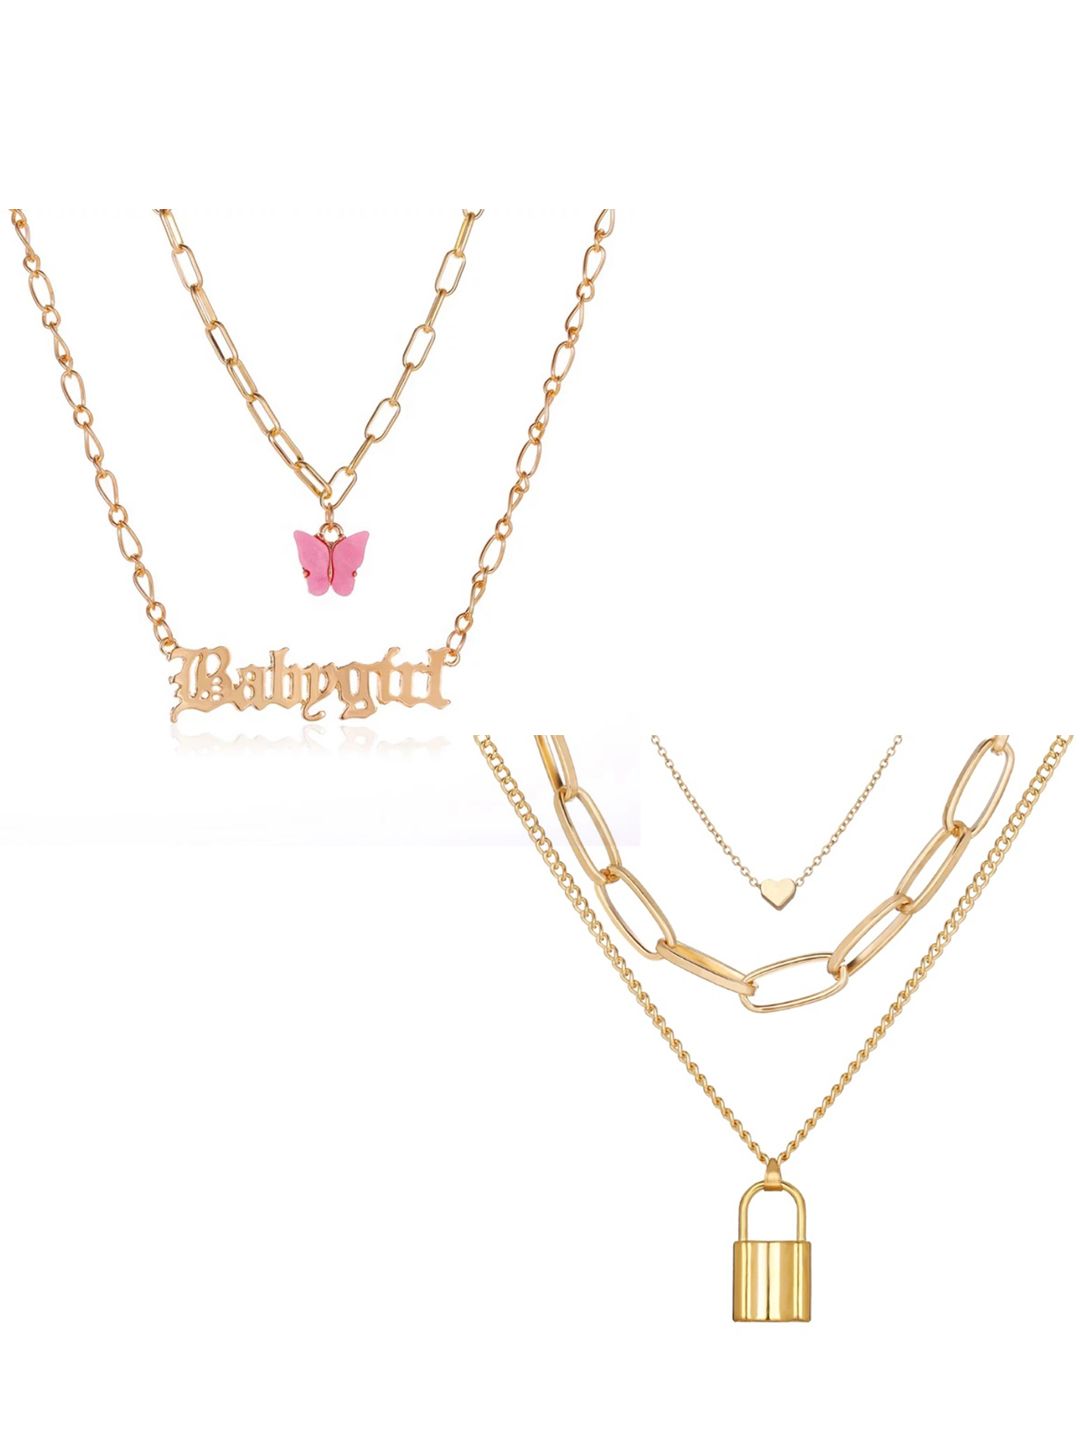 Vembley Set of 2 Gold-Plated & Pink Layered Necklace Price in India